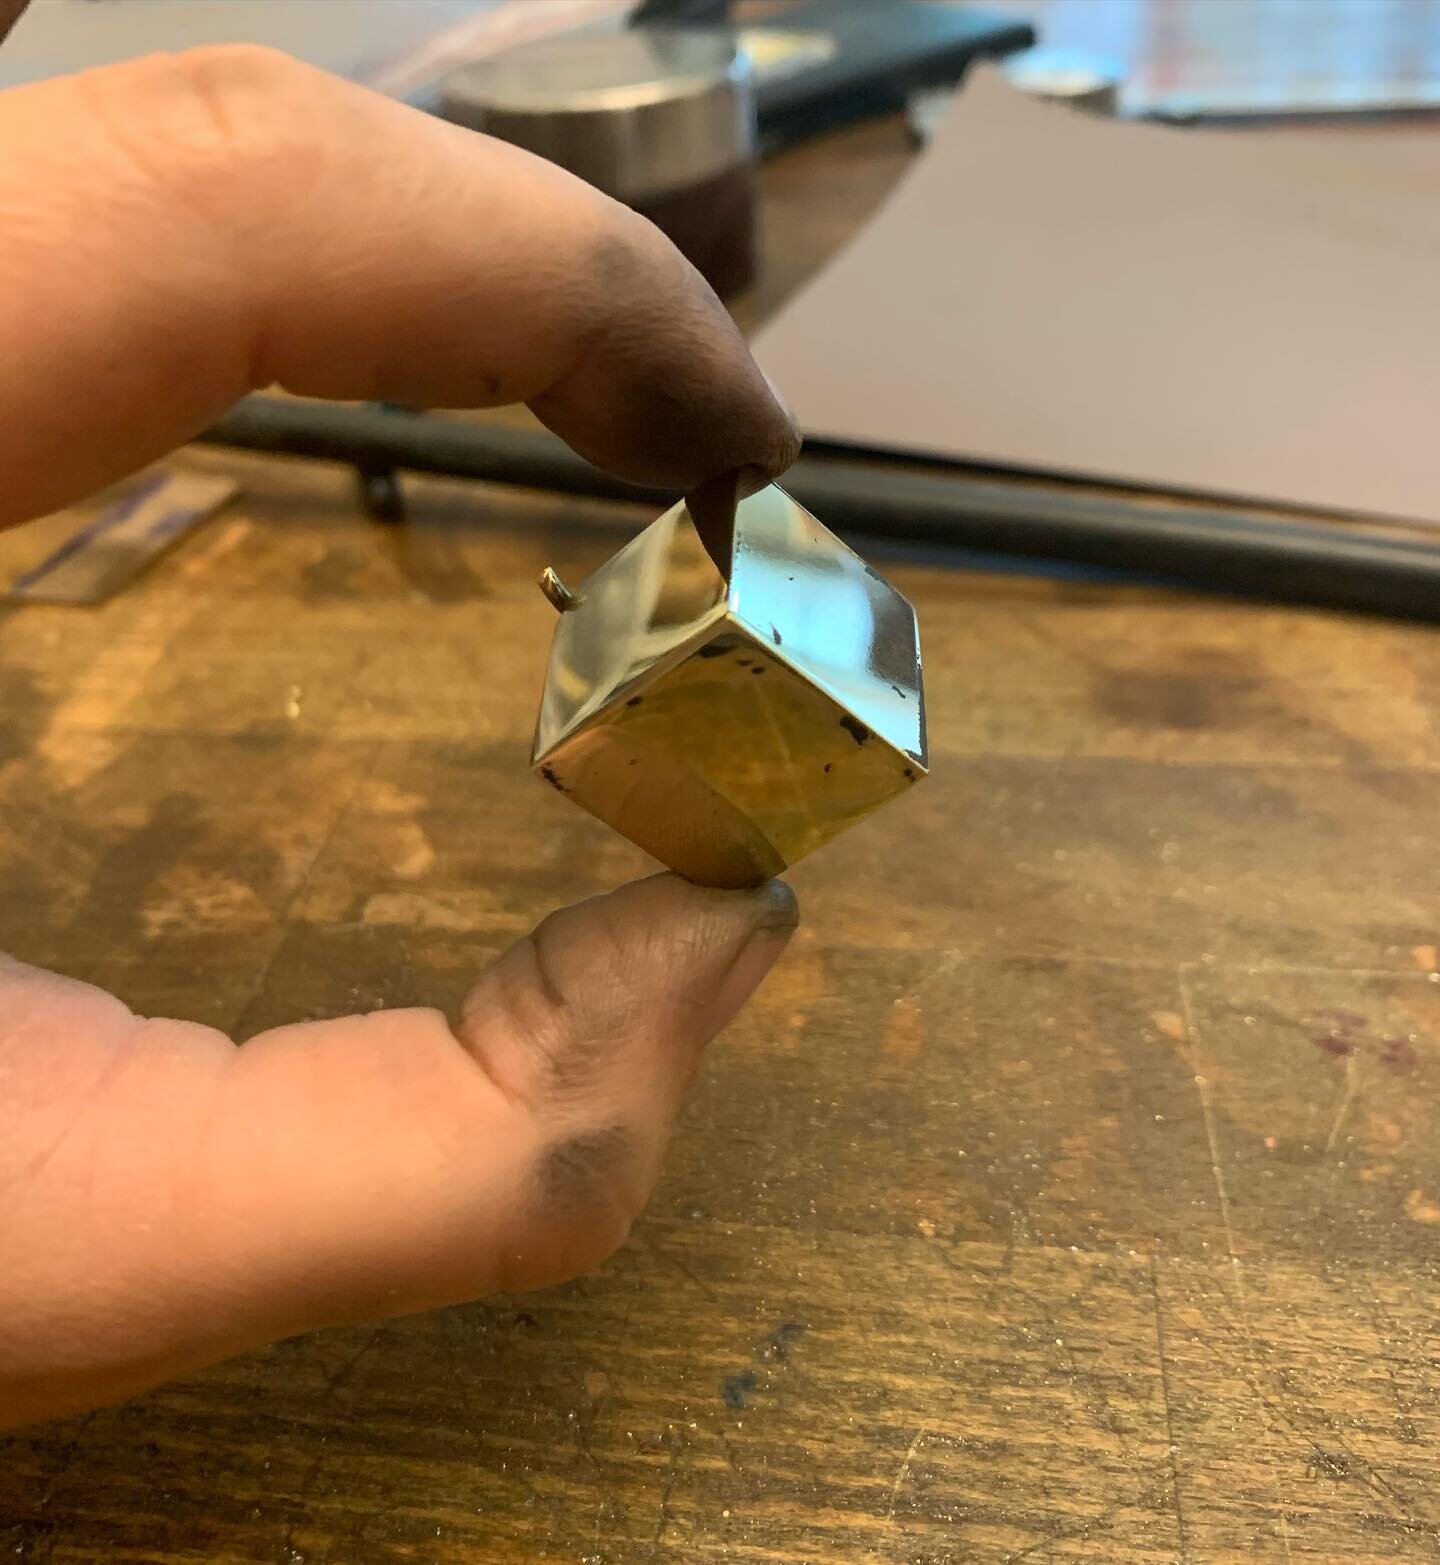 It&rsquo;s tiny, and it&rsquo;s shiny, and I&rsquo;m so damn pleased! Fabricated  this 3/4 in. brass cube and wanted to document how perfect it was before I ruin it with the next solder seam. #metalsmithing #metalworking #handmade